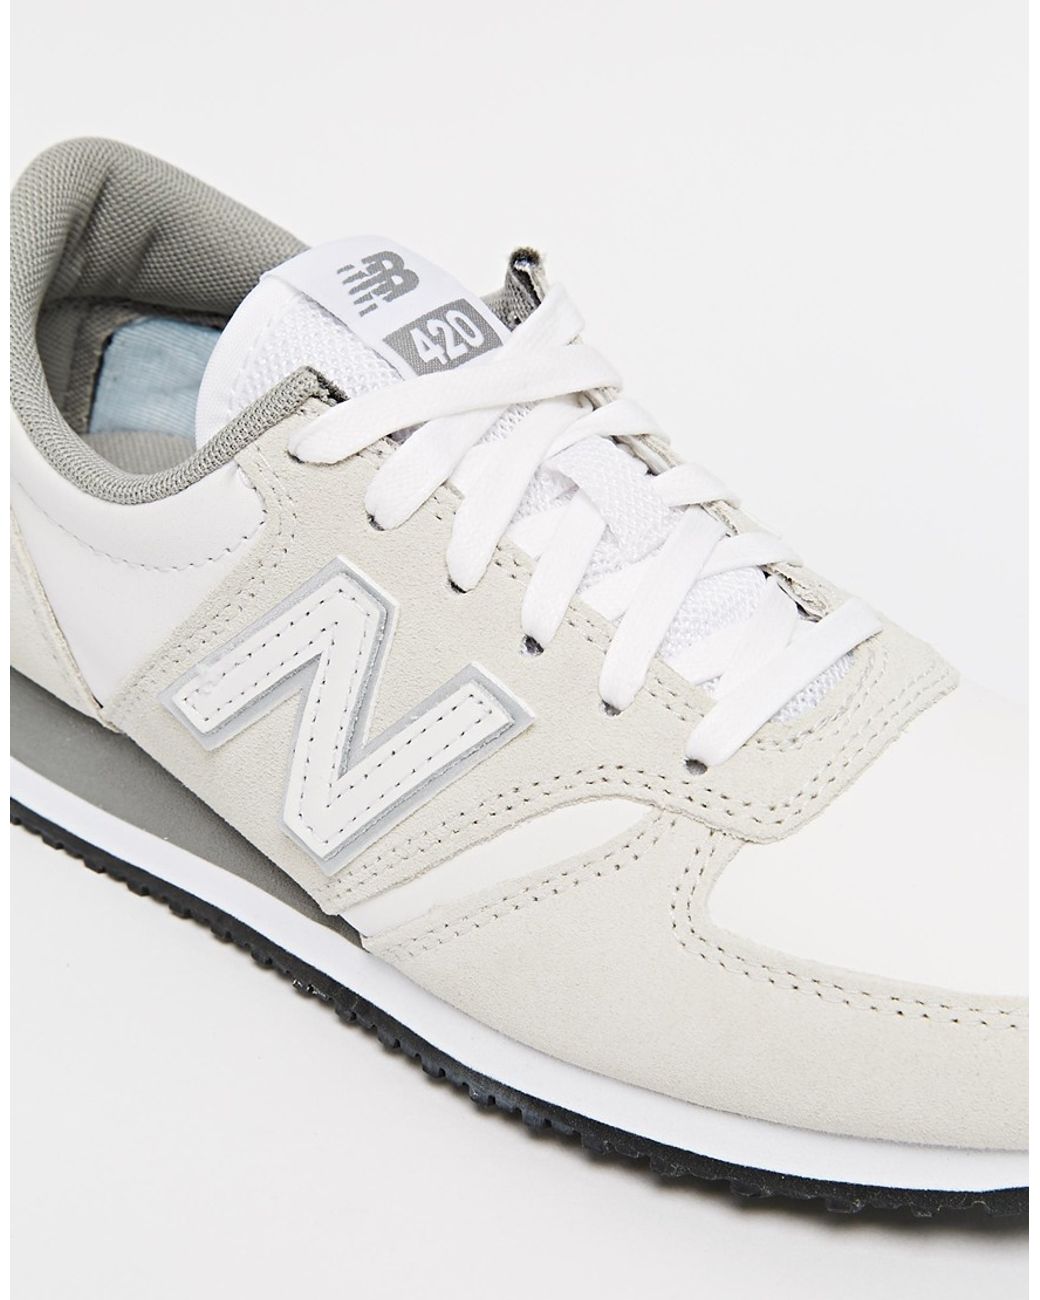 New Balance Women's Natural 420 Suede Low-Top Sneakers